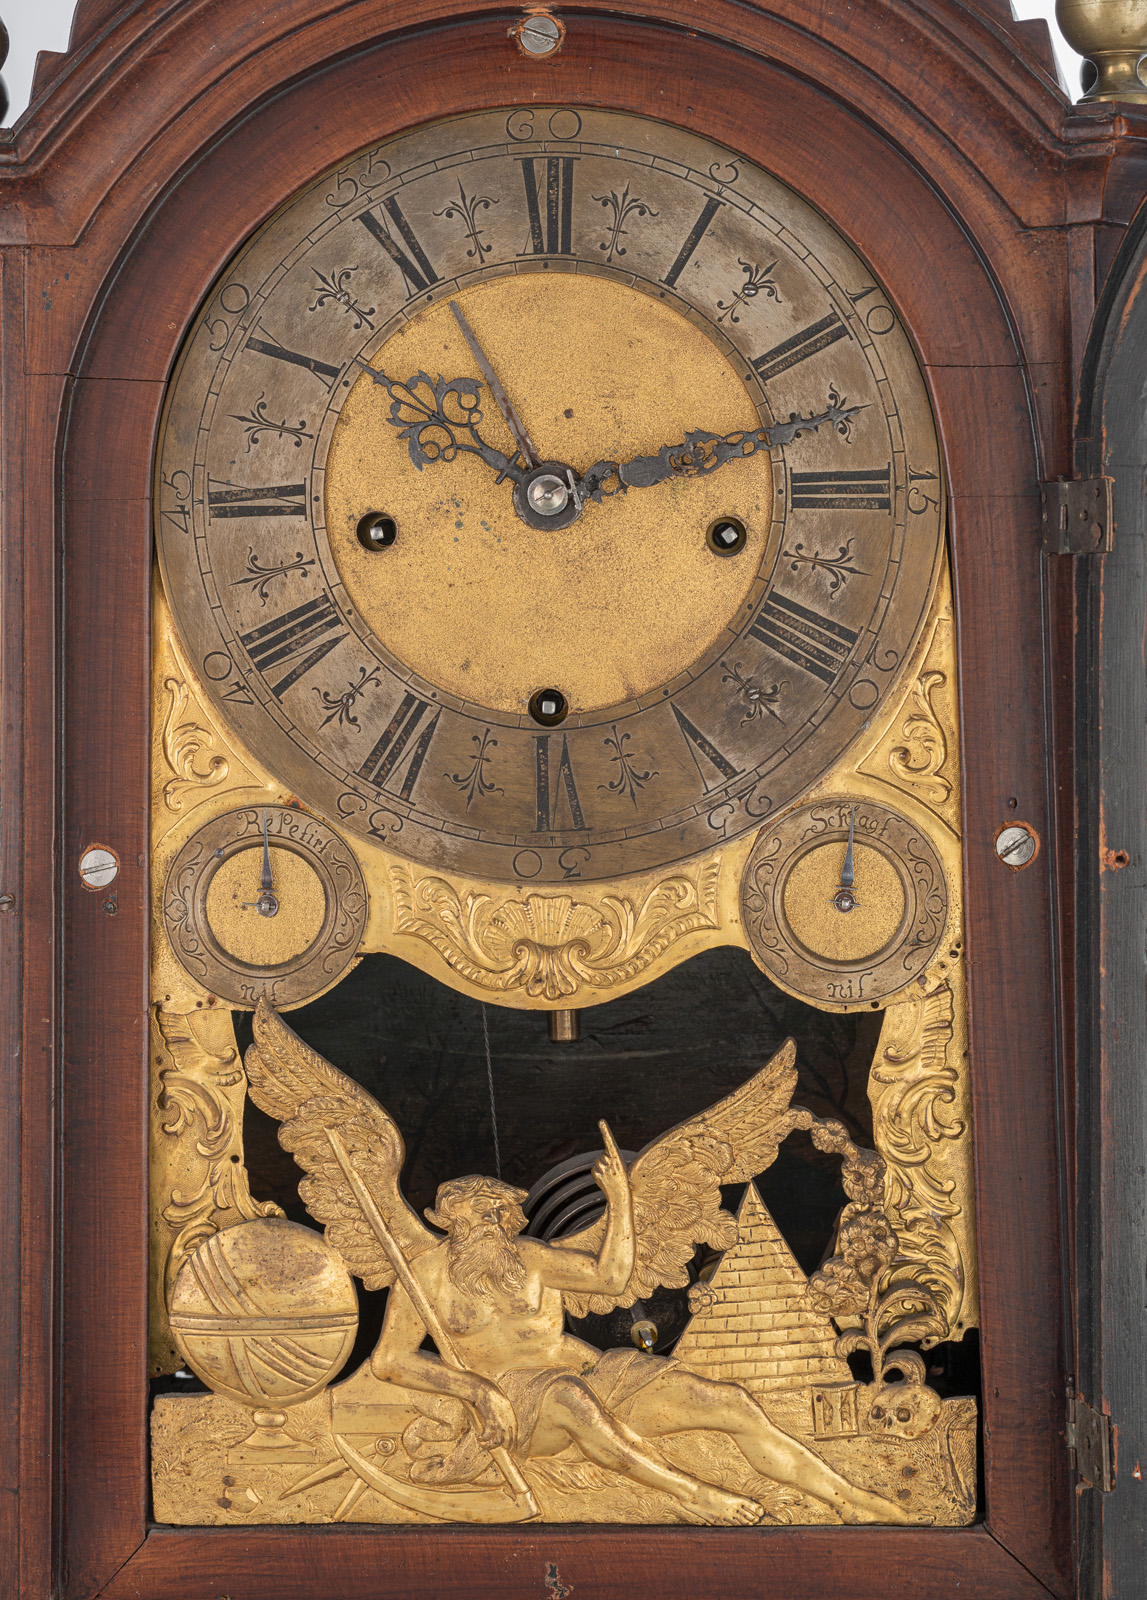 A SOUTH GERMAN BRASS MOUNTED GRAINED WOOD AND DISPLAY "STUTZUHR" CLOCK - Image 3 of 4